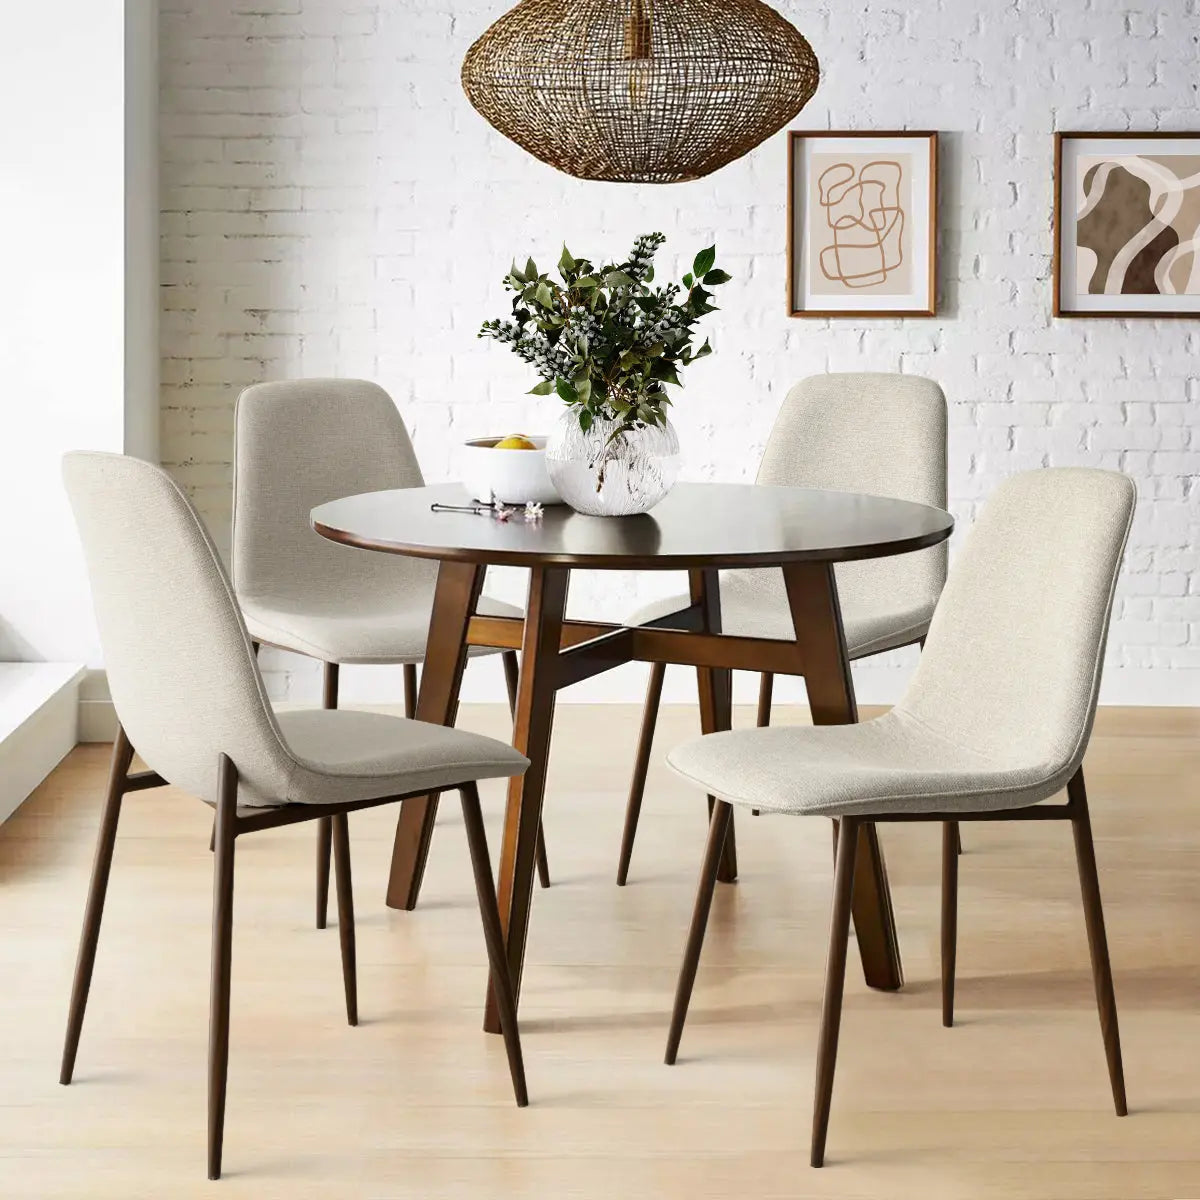 Oslo Dining Chairs with Walnut Legs (Set of 4) The Pop Maison